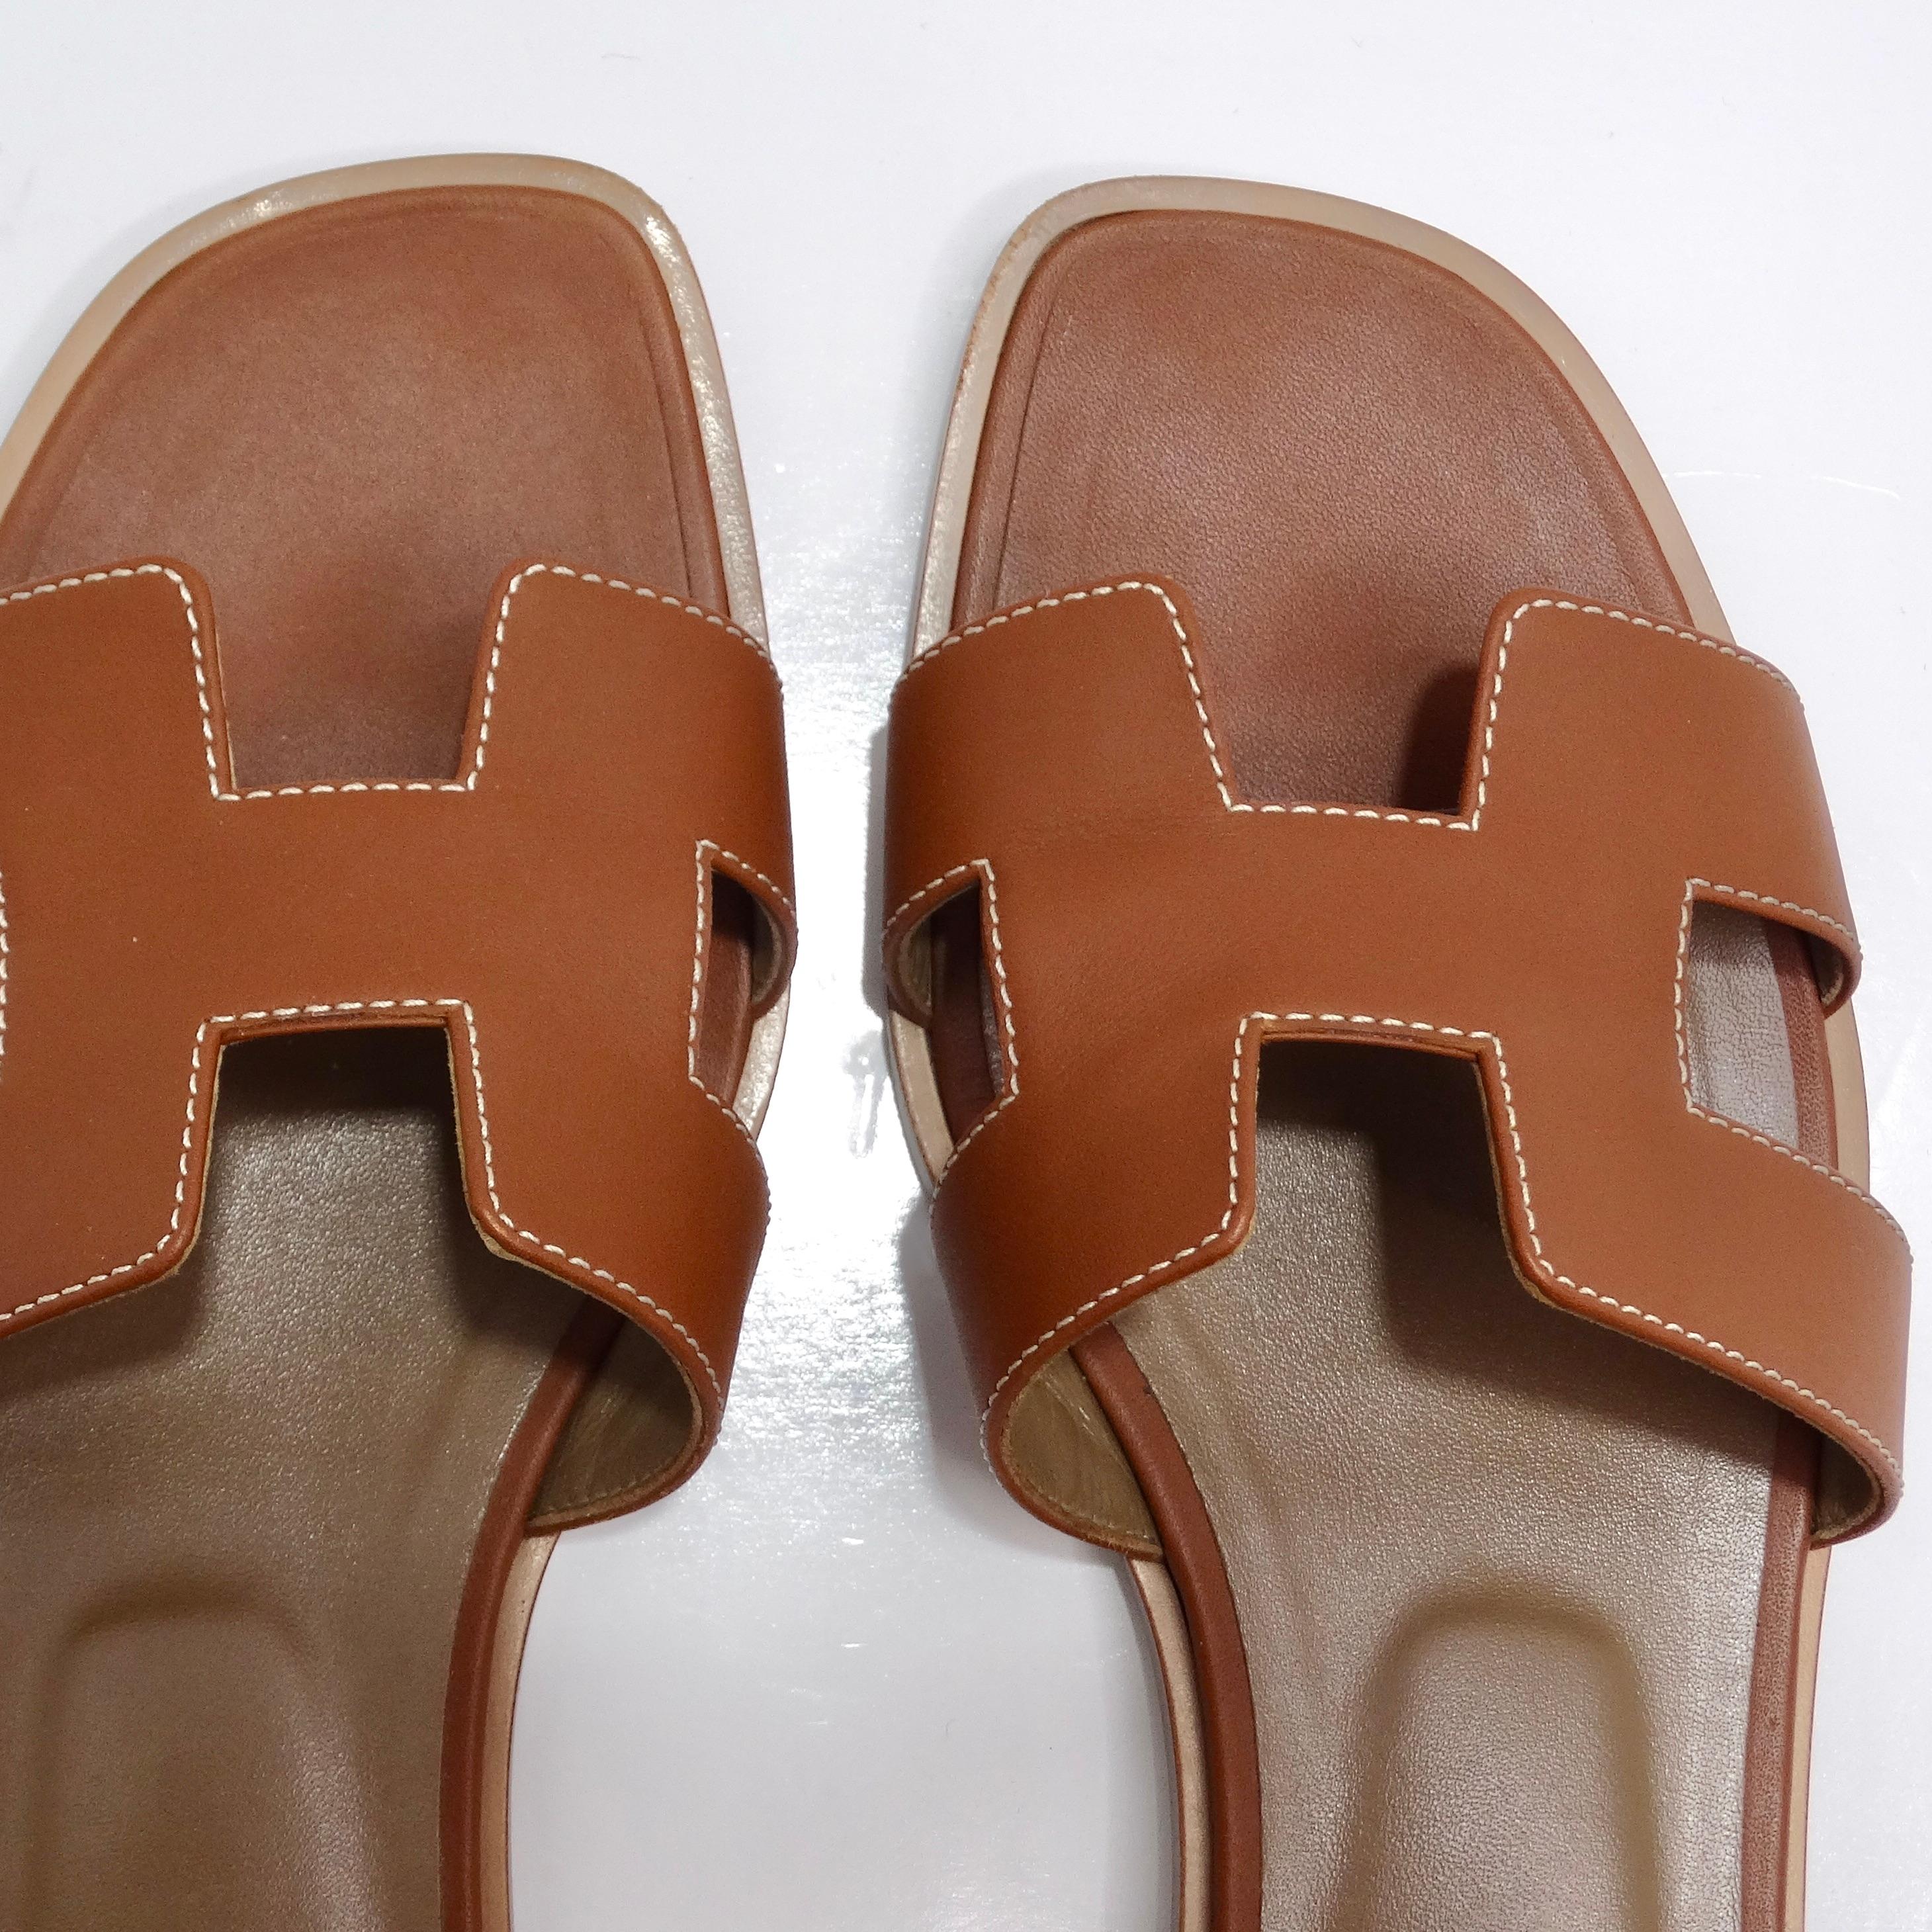 Introducing the epitome of understated luxury: the Hermes Oran Sandals in classic brown. Crafted from sumptuous camel brown leather, these slip-on sandals boast the iconic 